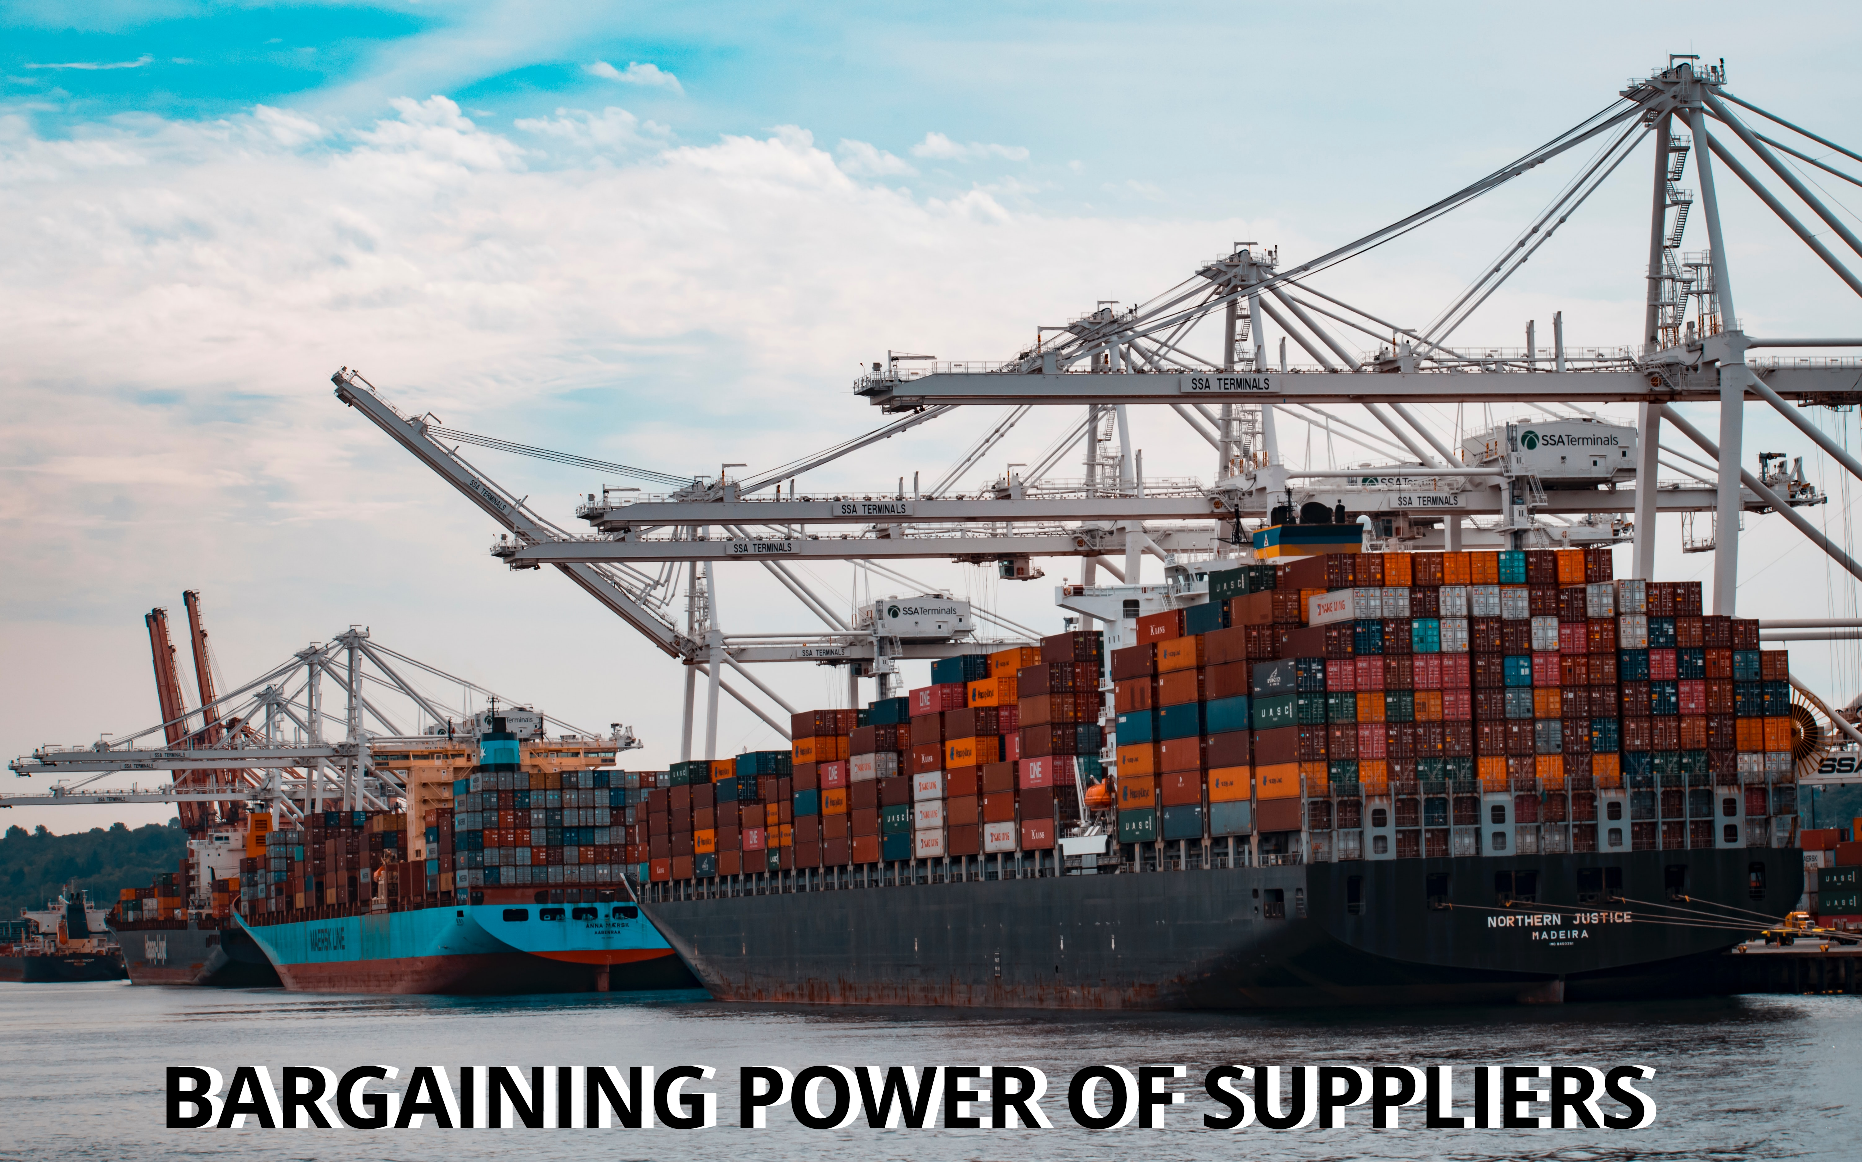 bargaining power of suppliers, bargaining power of suppliers example, bargaining power of suppliers airline industry, bargaining power of suppliers in airline industry, bargaining power of suppliers in retail industry